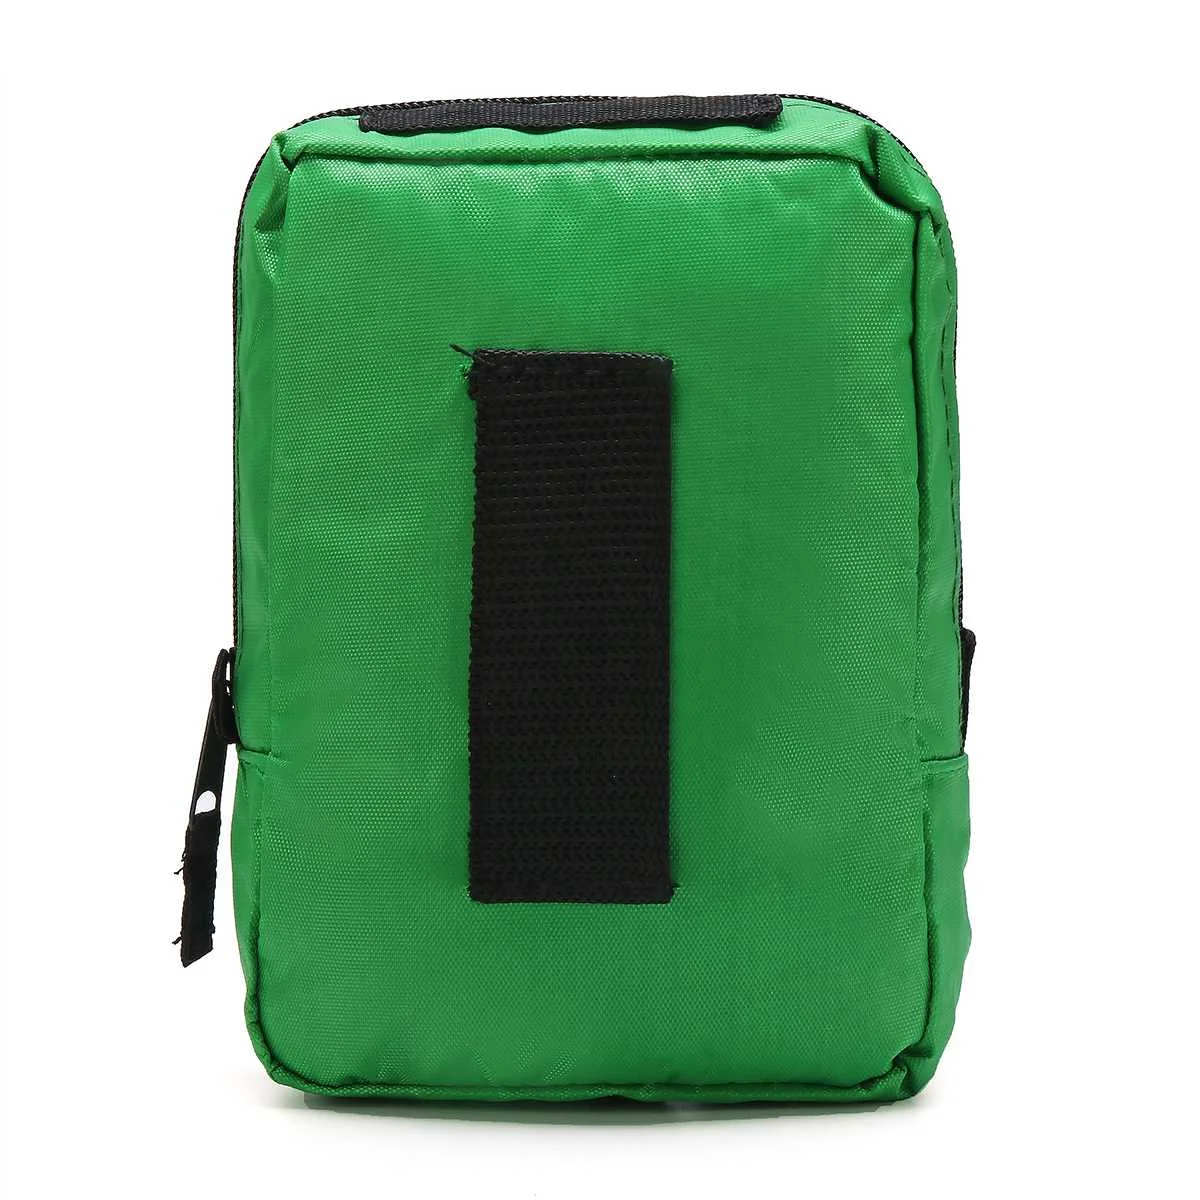 

121Pcs Green Mini Safe Camping Hiking Car First Aid Bag Kit Emergency Kit Treatment Pack Outdoor Wilderness Survival